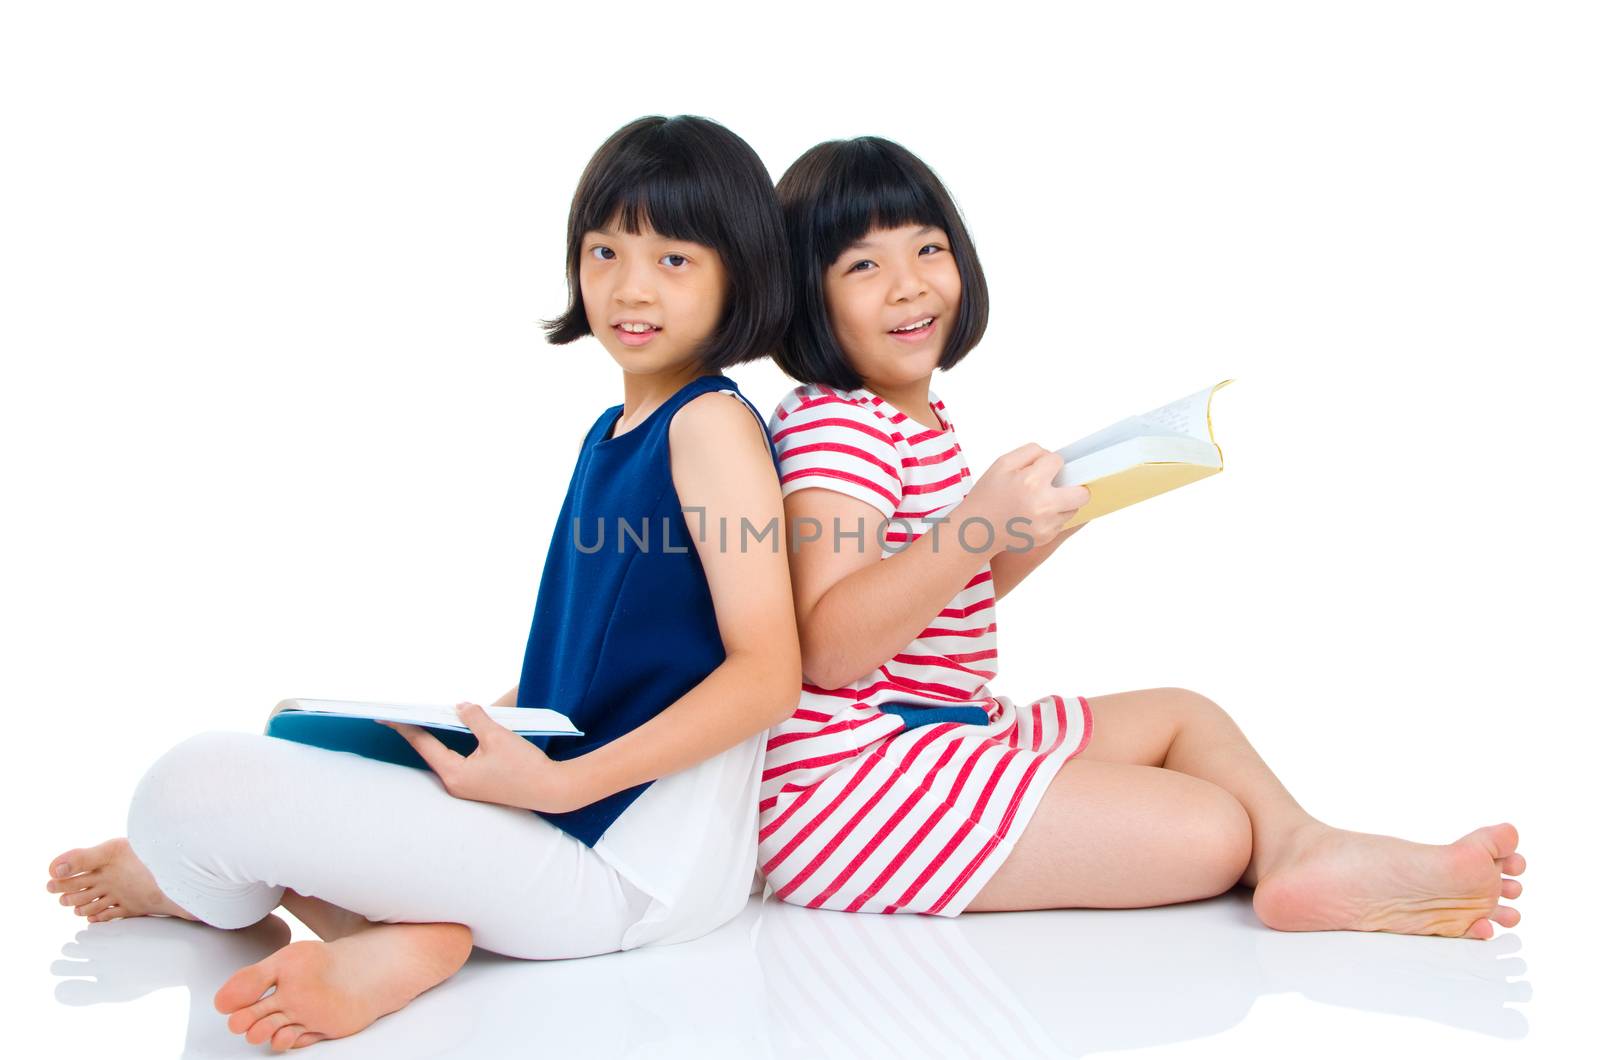 Asian girls sitting on the floor and reading. Isolated on white background.